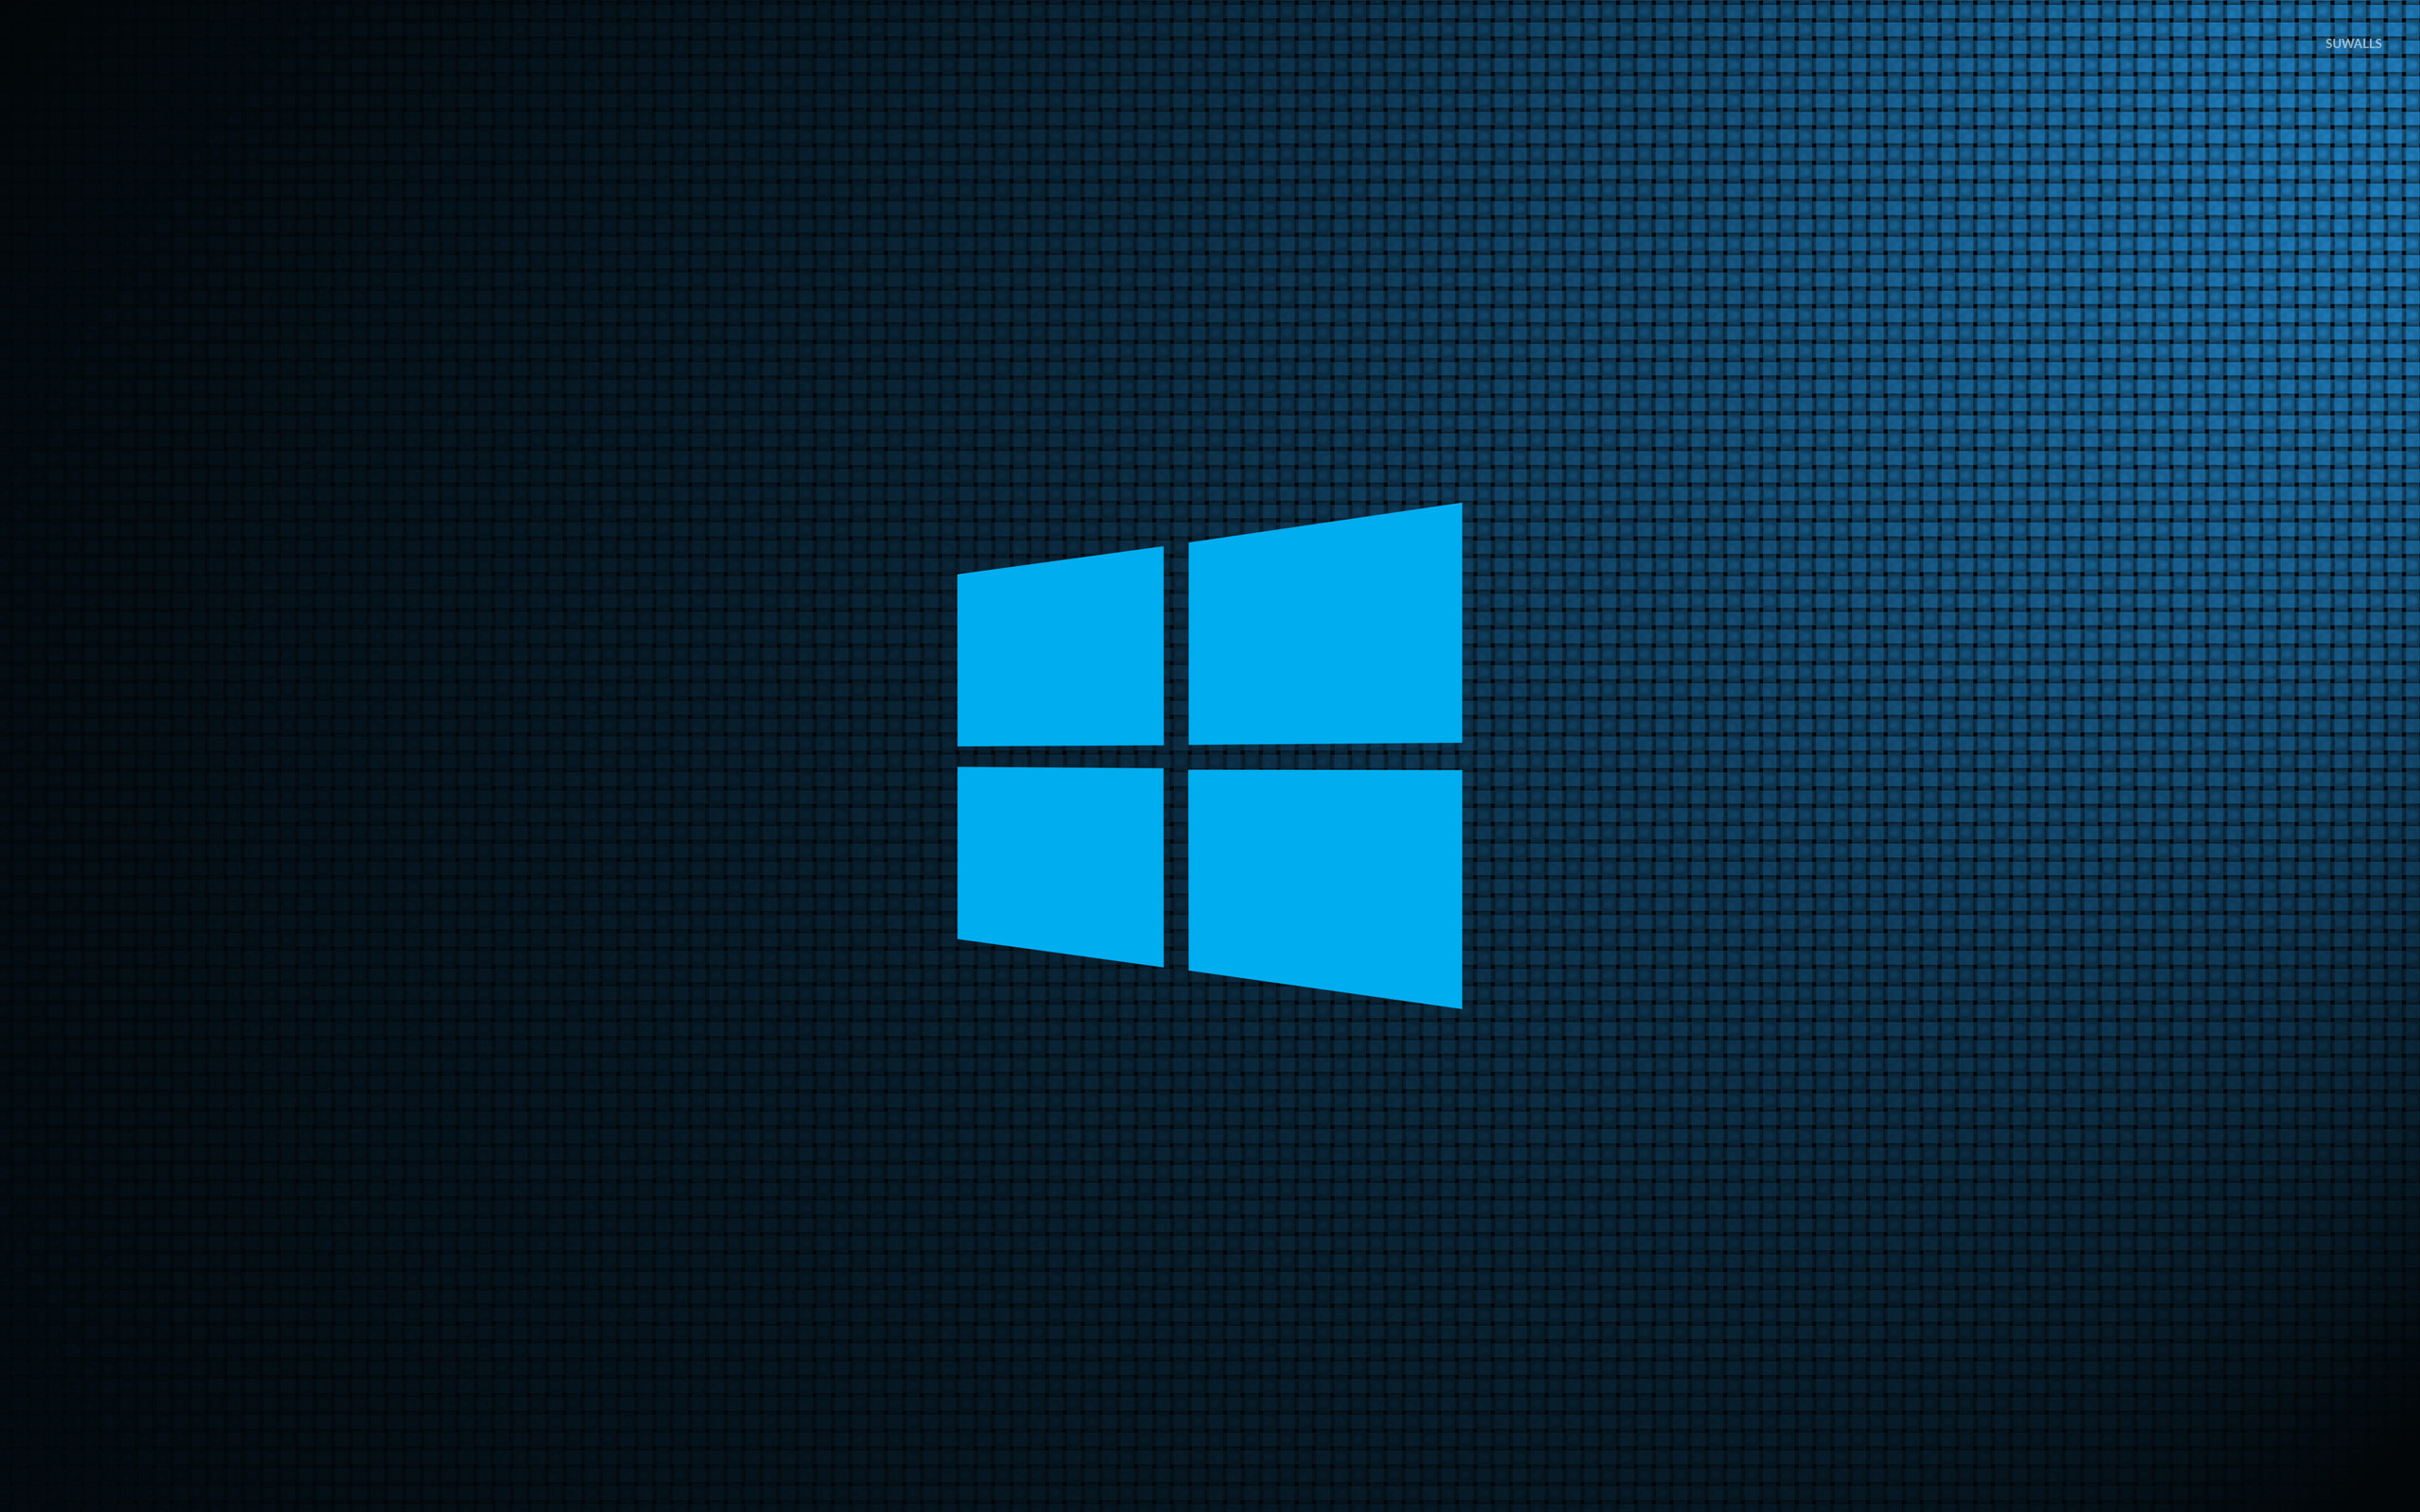 Windows 10 on weave simple logo wallpaper - Computer wallpapers - #46829